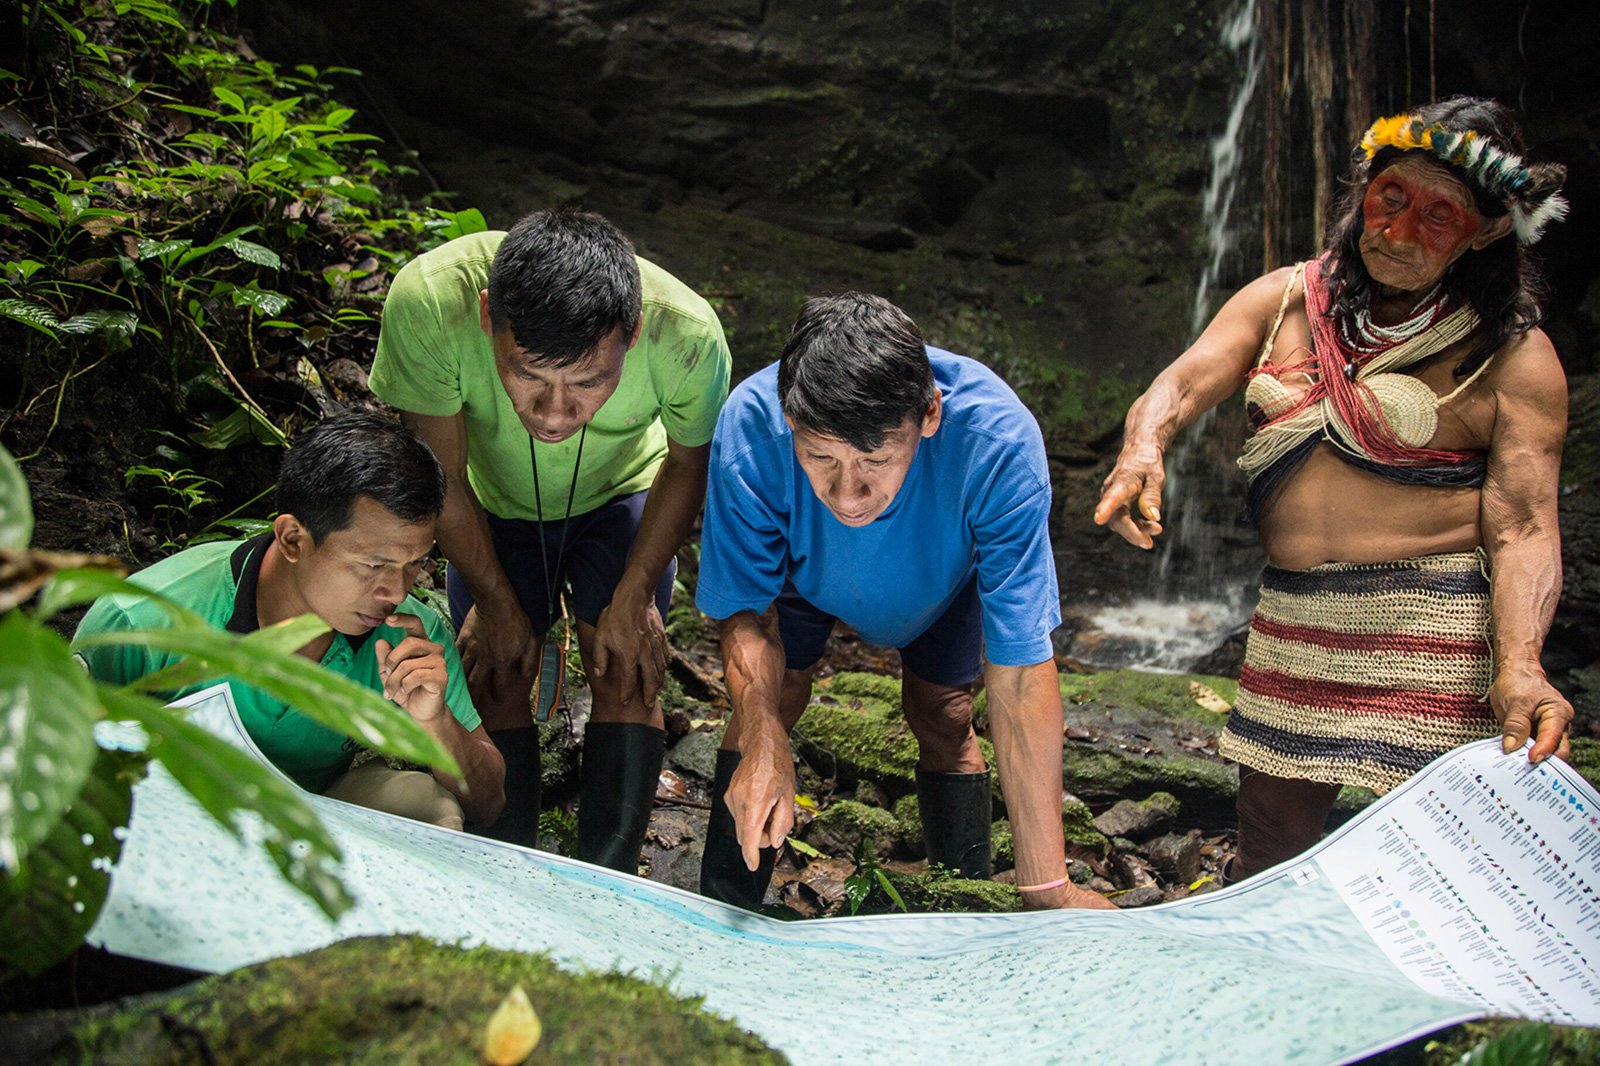 The Waorani communities' maps identify historic battle sites, ancient cave-carvings, jaguar trails, medicinal plants, animal reproductive zones, important fishing holes, creek-crossings and sacred waterfalls.